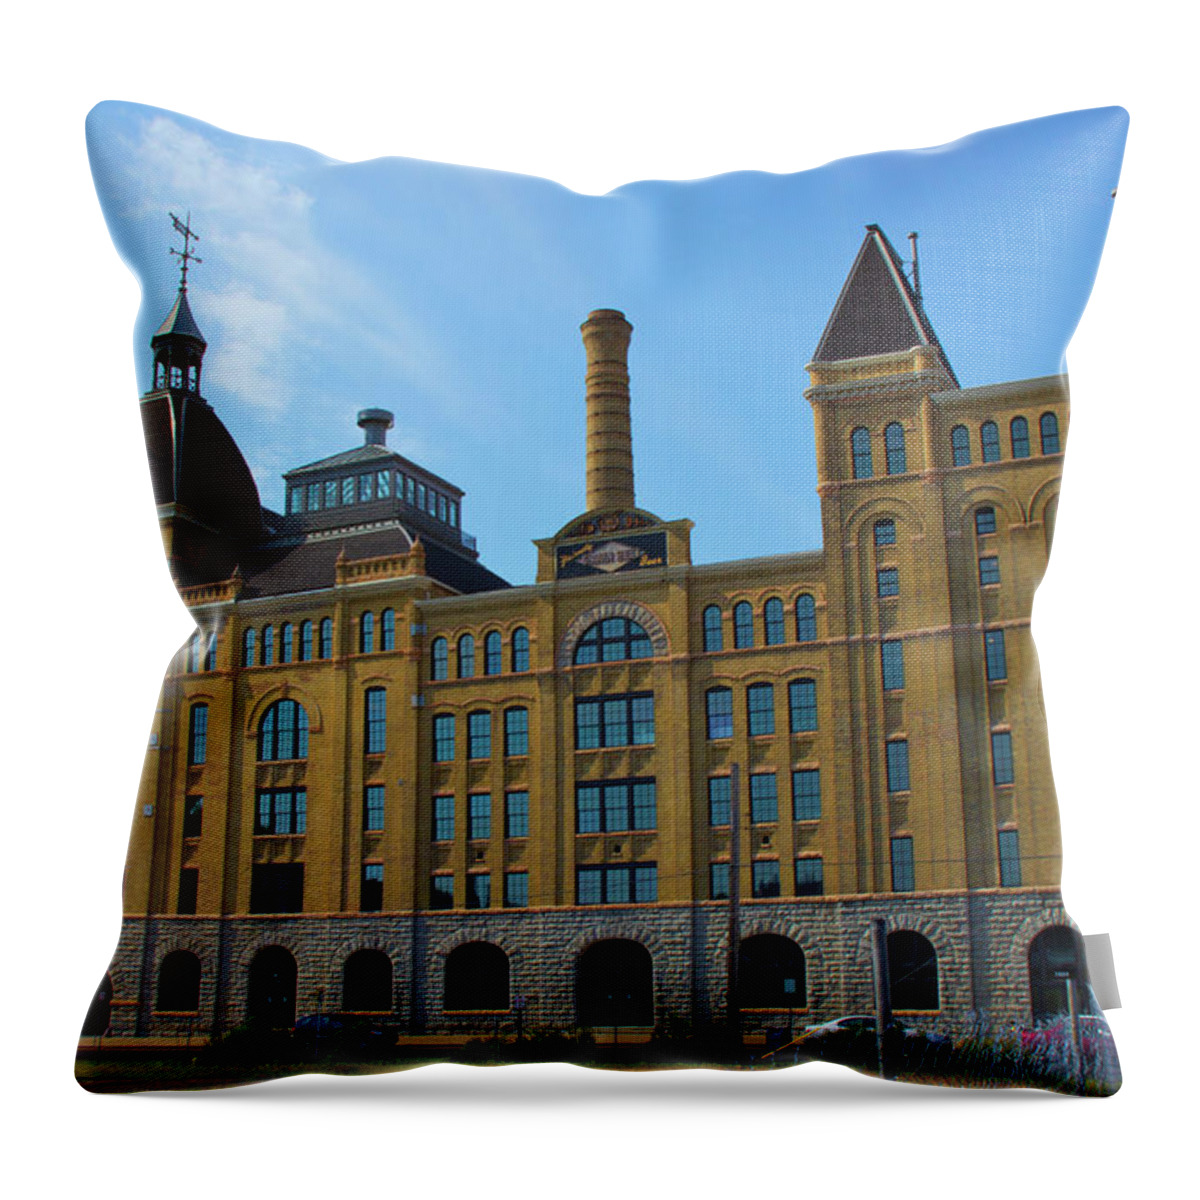 In Focus Throw Pillow featuring the photograph Grain Belt Brewery by Nancy Dunivin